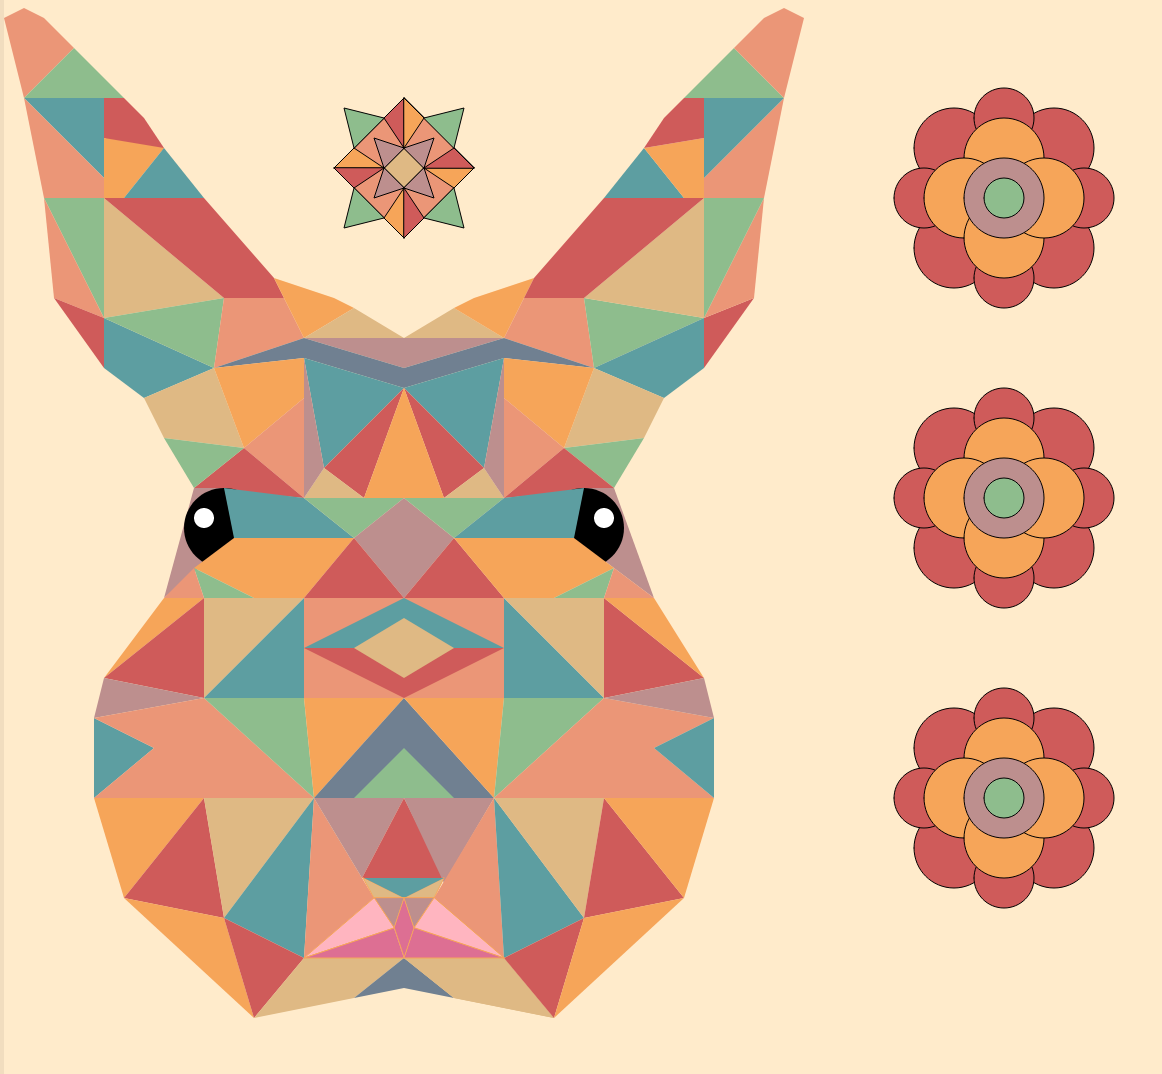 Many multicolored geometric shapes form an image of a rabbit head. A square "flower" sits over the head, and three "flowers" made of circles sit alongside the head.